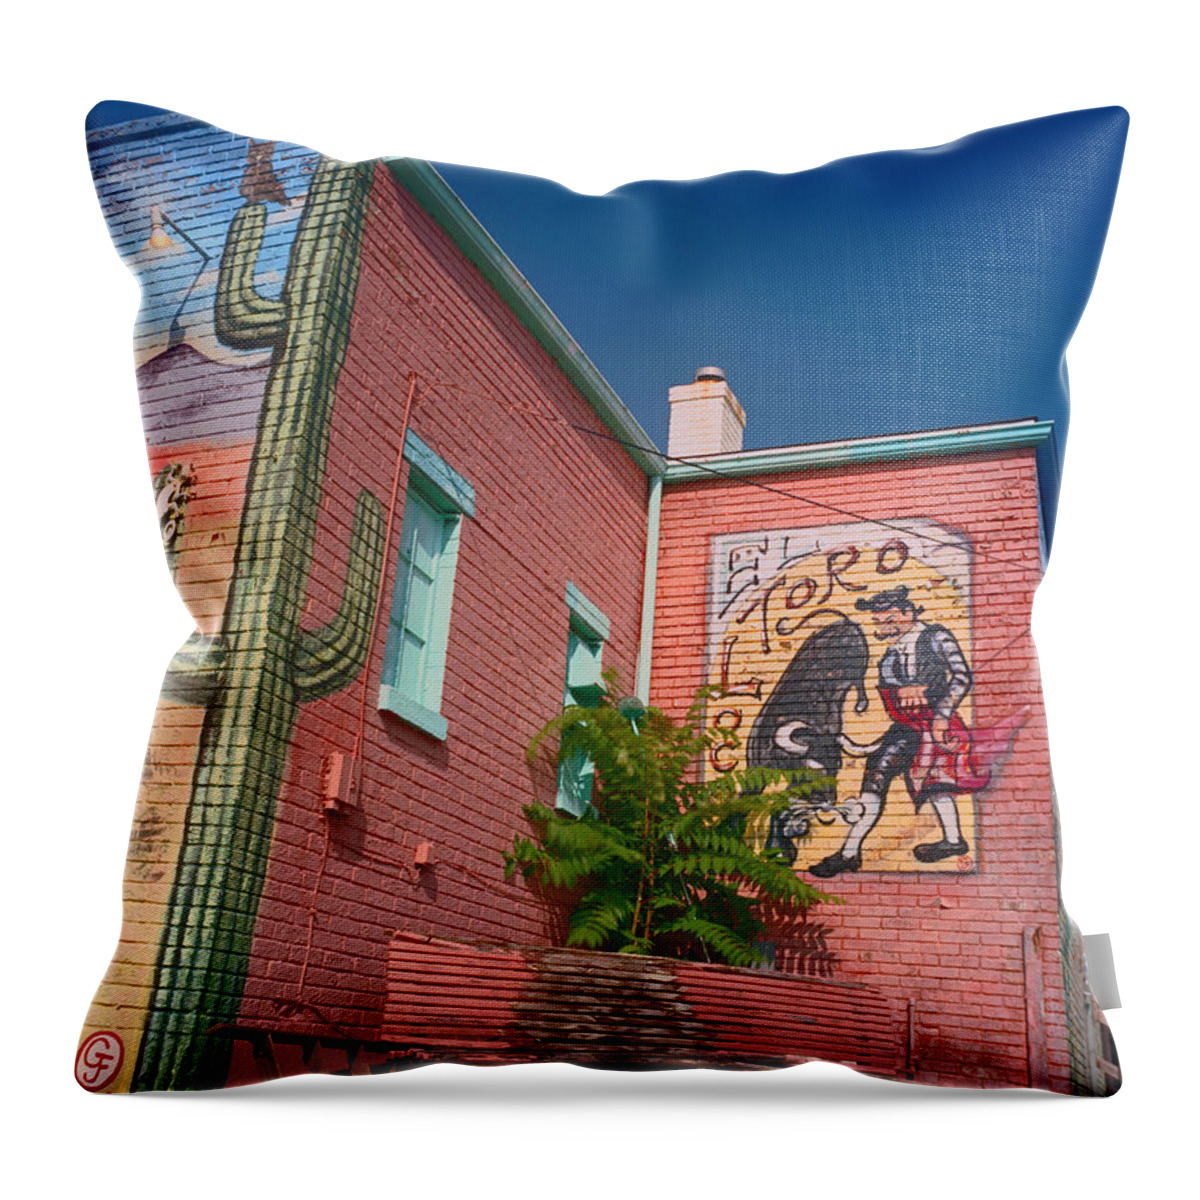 Los Murales Throw Pillow featuring the photograph Los Murales by Kris Rasmusson